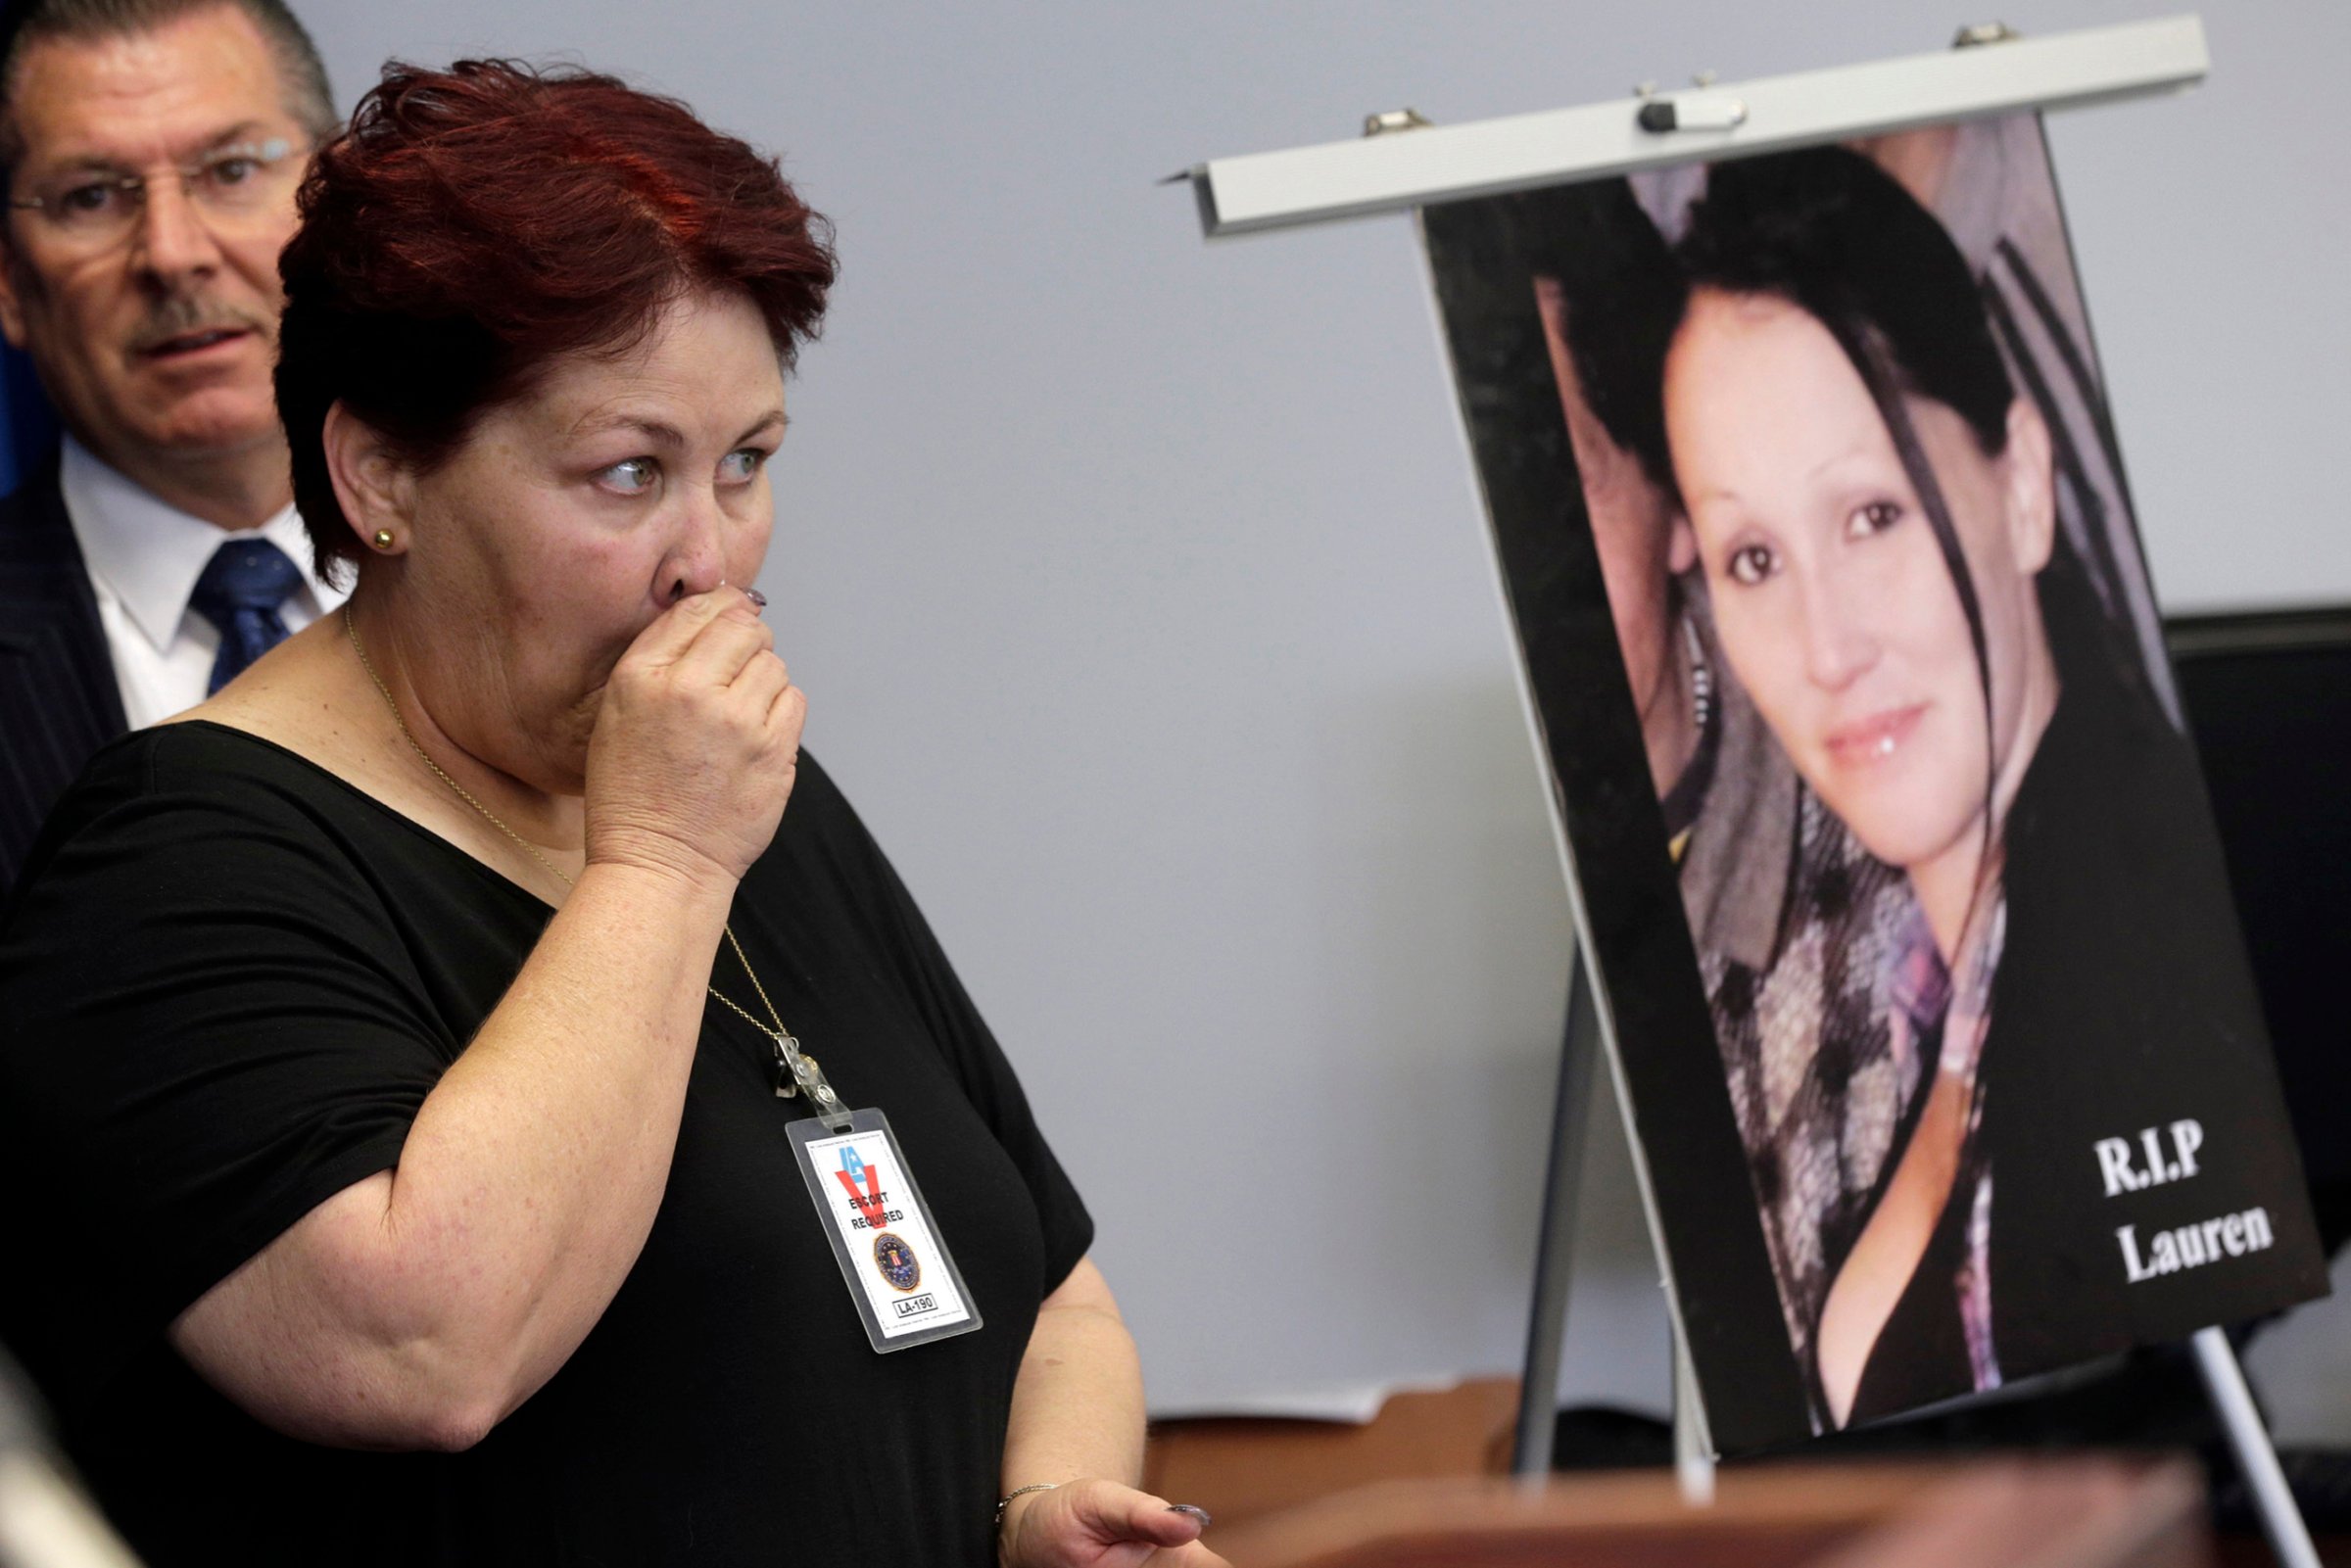 Jerilyn Olguin, mother of murder victim Lauren Elaine Olguin, seen in the photo, appears at a FBI news conference announcing additions to its 10 Most Wanted list, in Los Angeles, May 19, 2016.